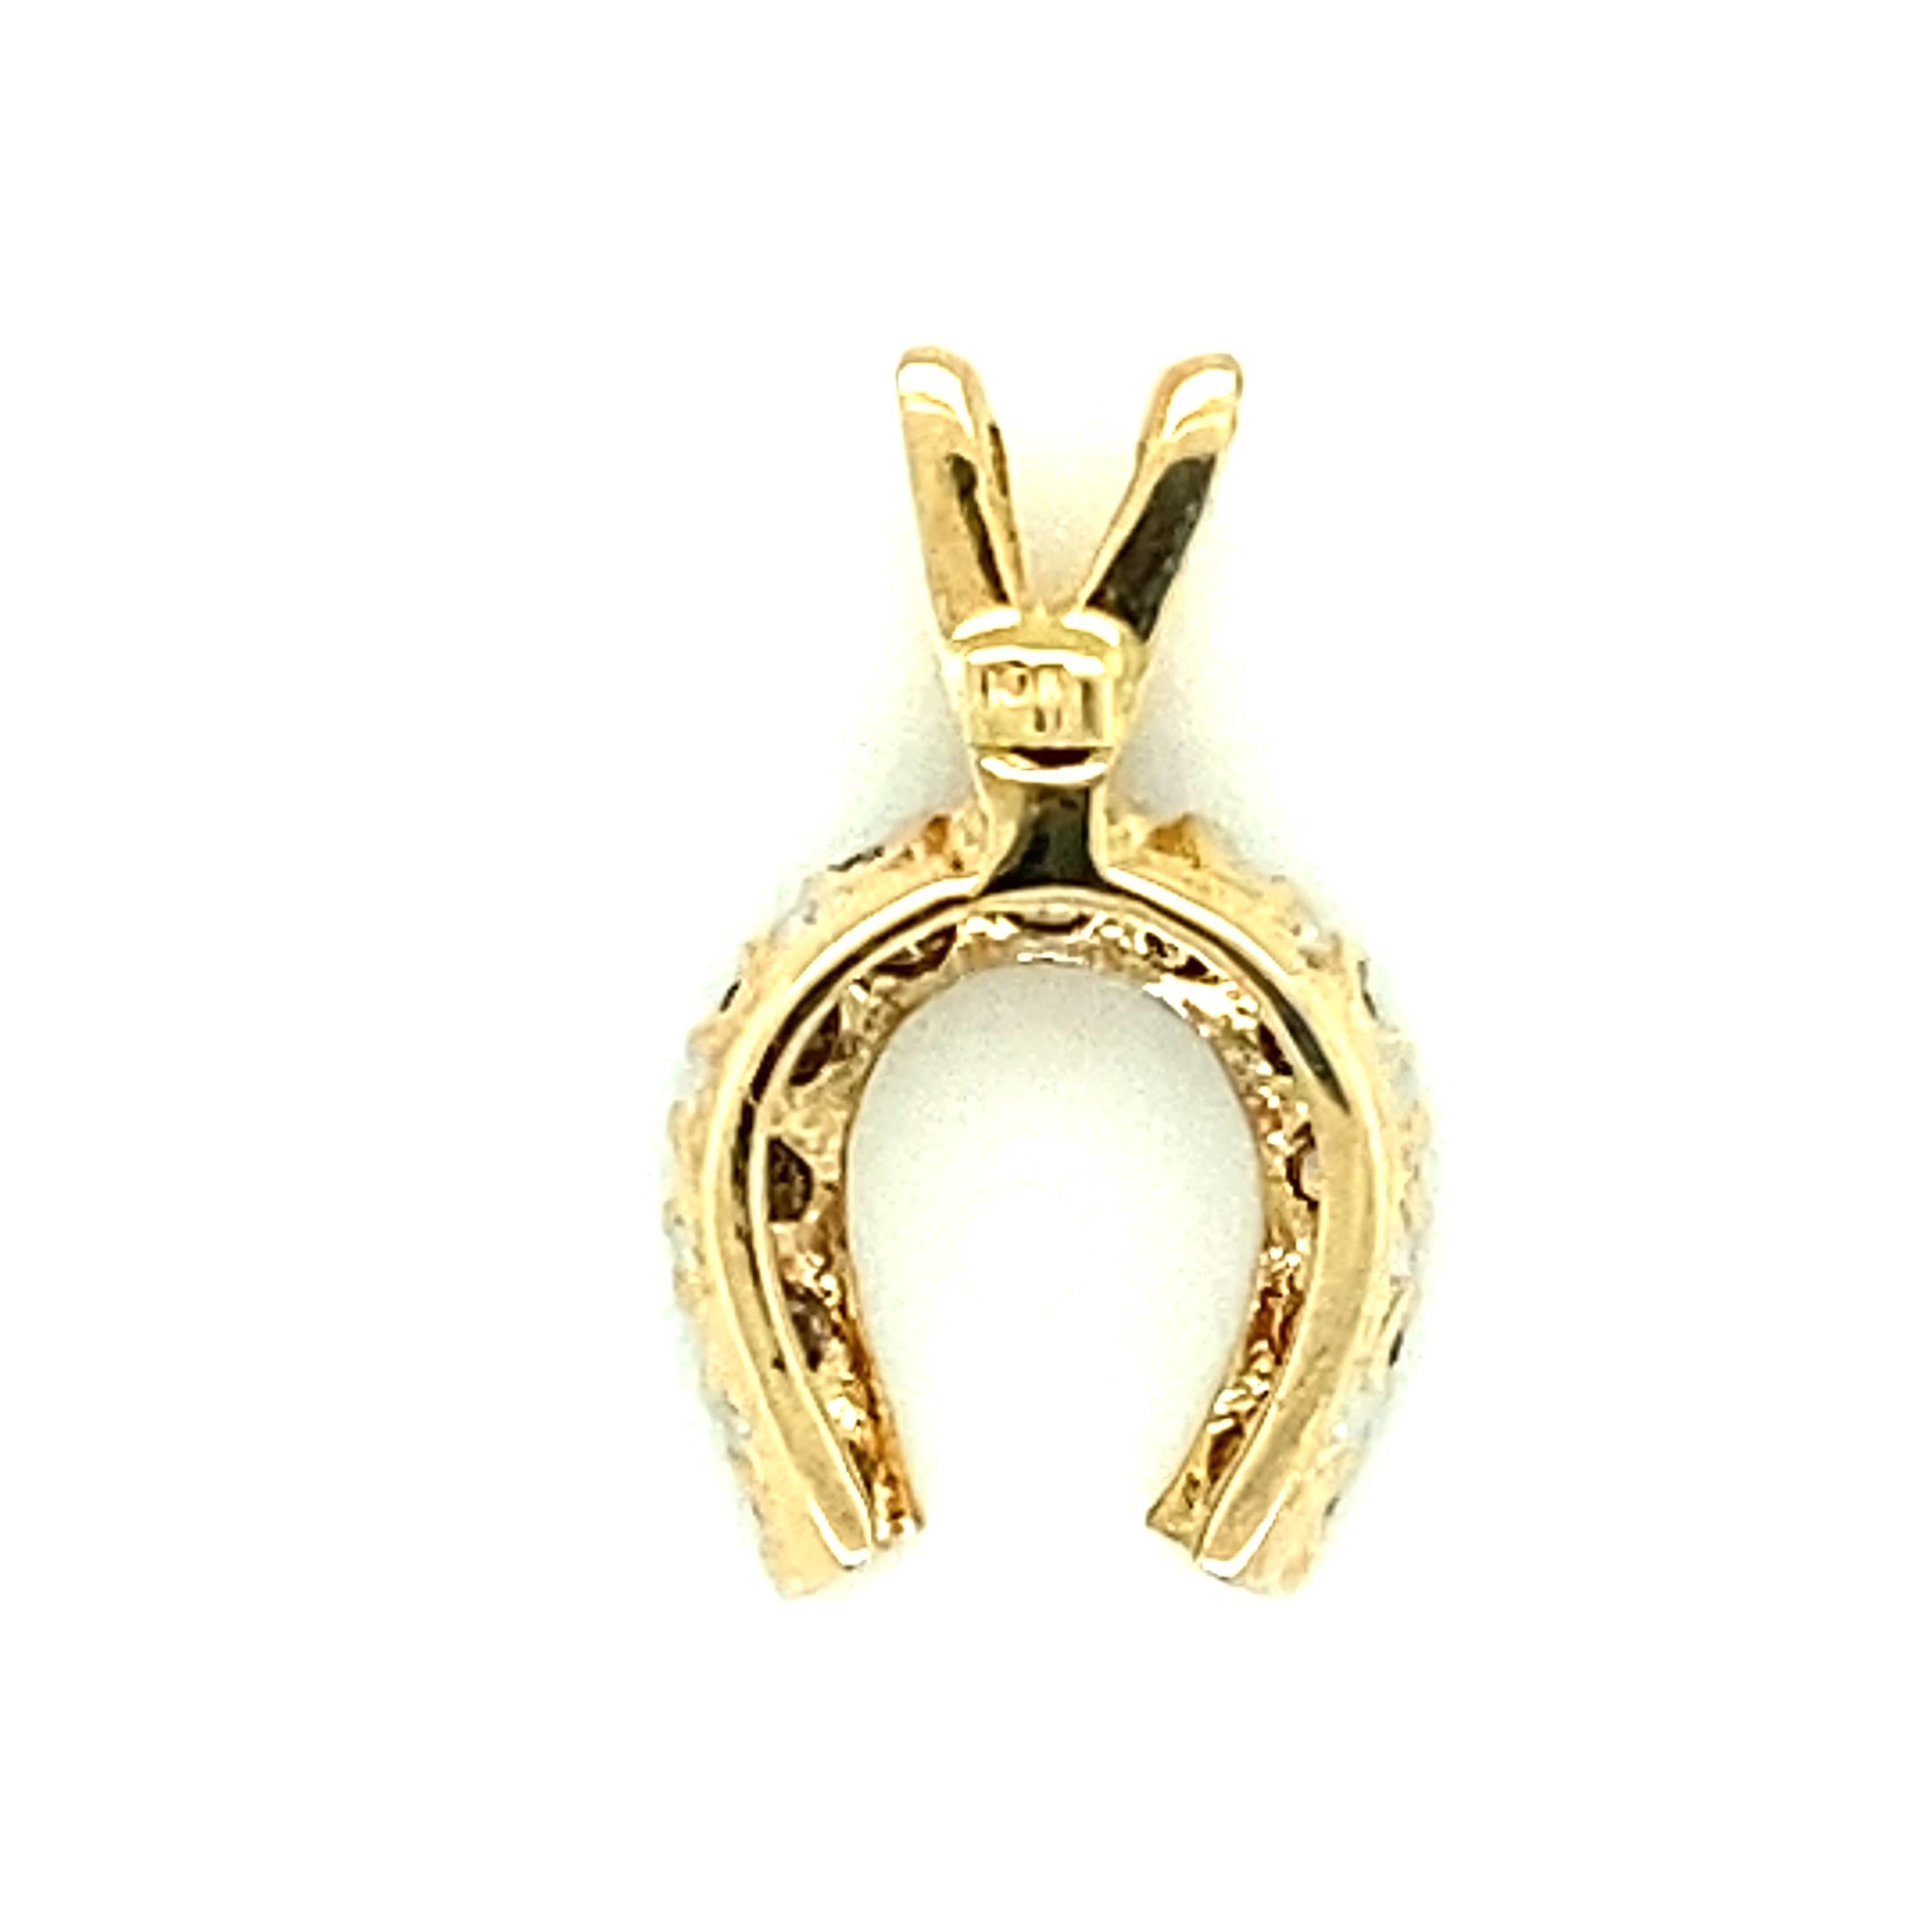 10kt yellow gold charm/pendant in the shape of a lucky horseshoe with approximately .17-.20 carat diamonds. The diamonds are approximately K-L color and I1-I2 clarity. The pendant measures just under .75